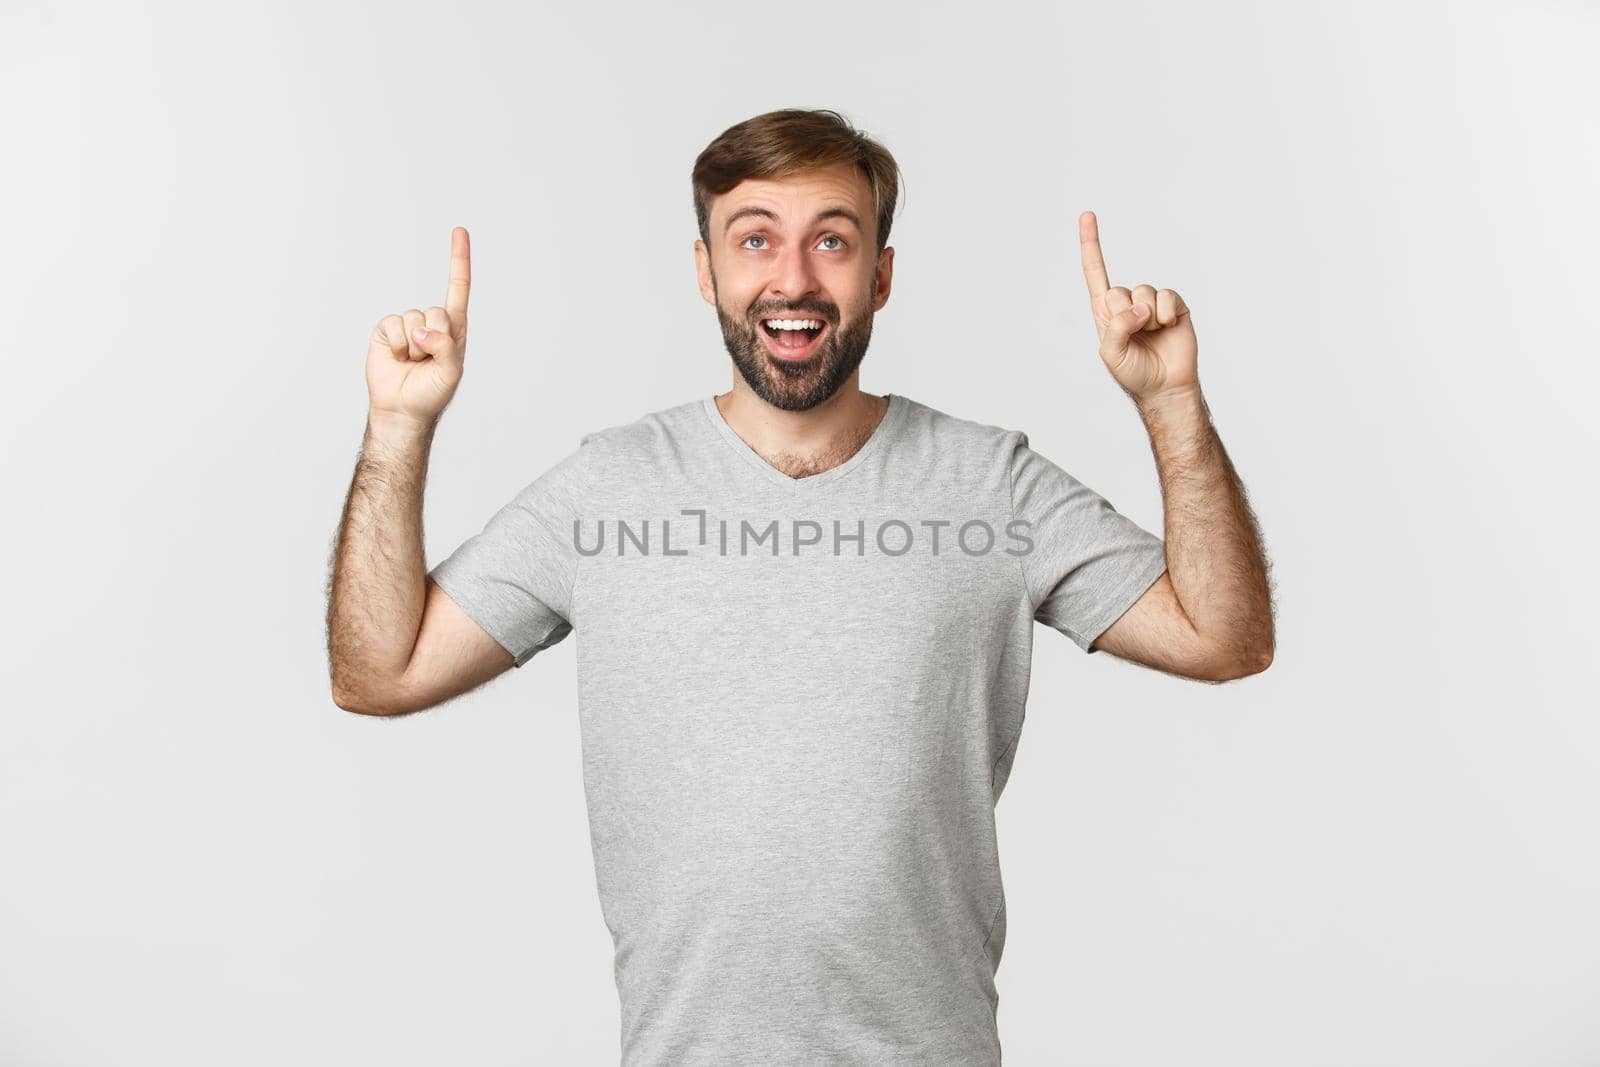 Portrait of happy surprised man with beard, looking fascinated and pointing fingers up, showing logo, standing over white background.